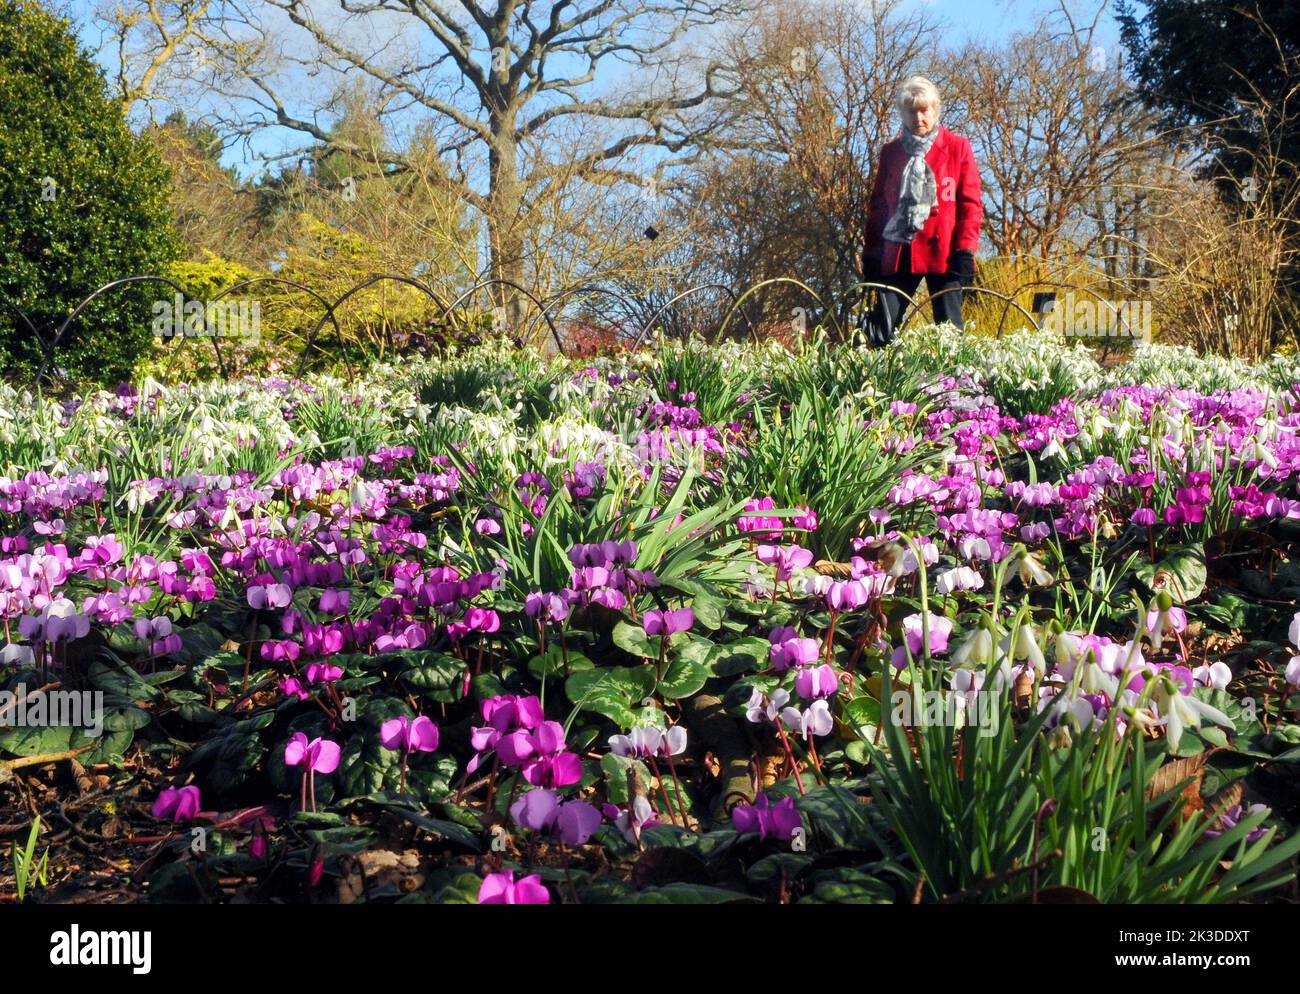 Early  March greets visitors to the winter garden at Hillier Gardens, near Romsey, Hampshire with a magnifcent and clourful display of cyclamen and snowdrops  Pic Mike Walker, Mike Walker Pictures,2015 Stock Photo